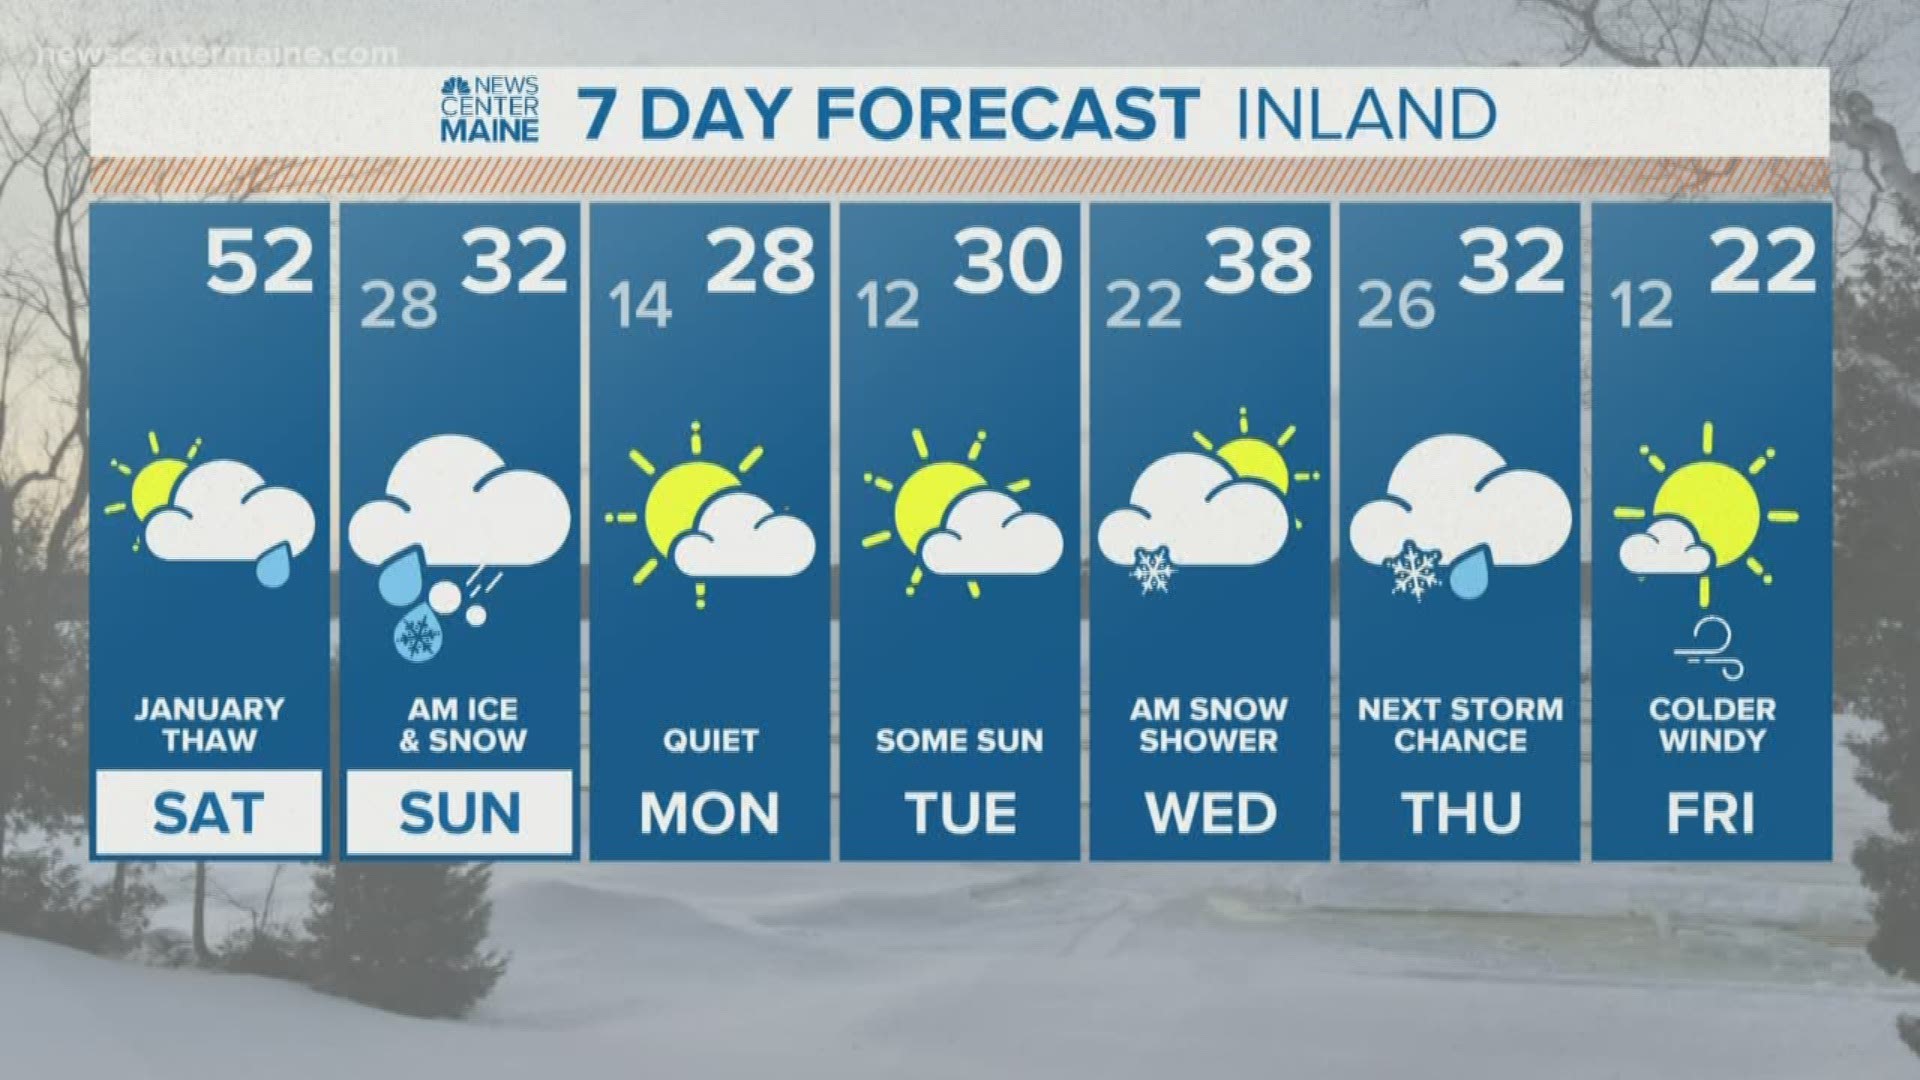 NEWS CENTER Maine Weather Video Forecast. Updated on 1/11/20 at 7 am.